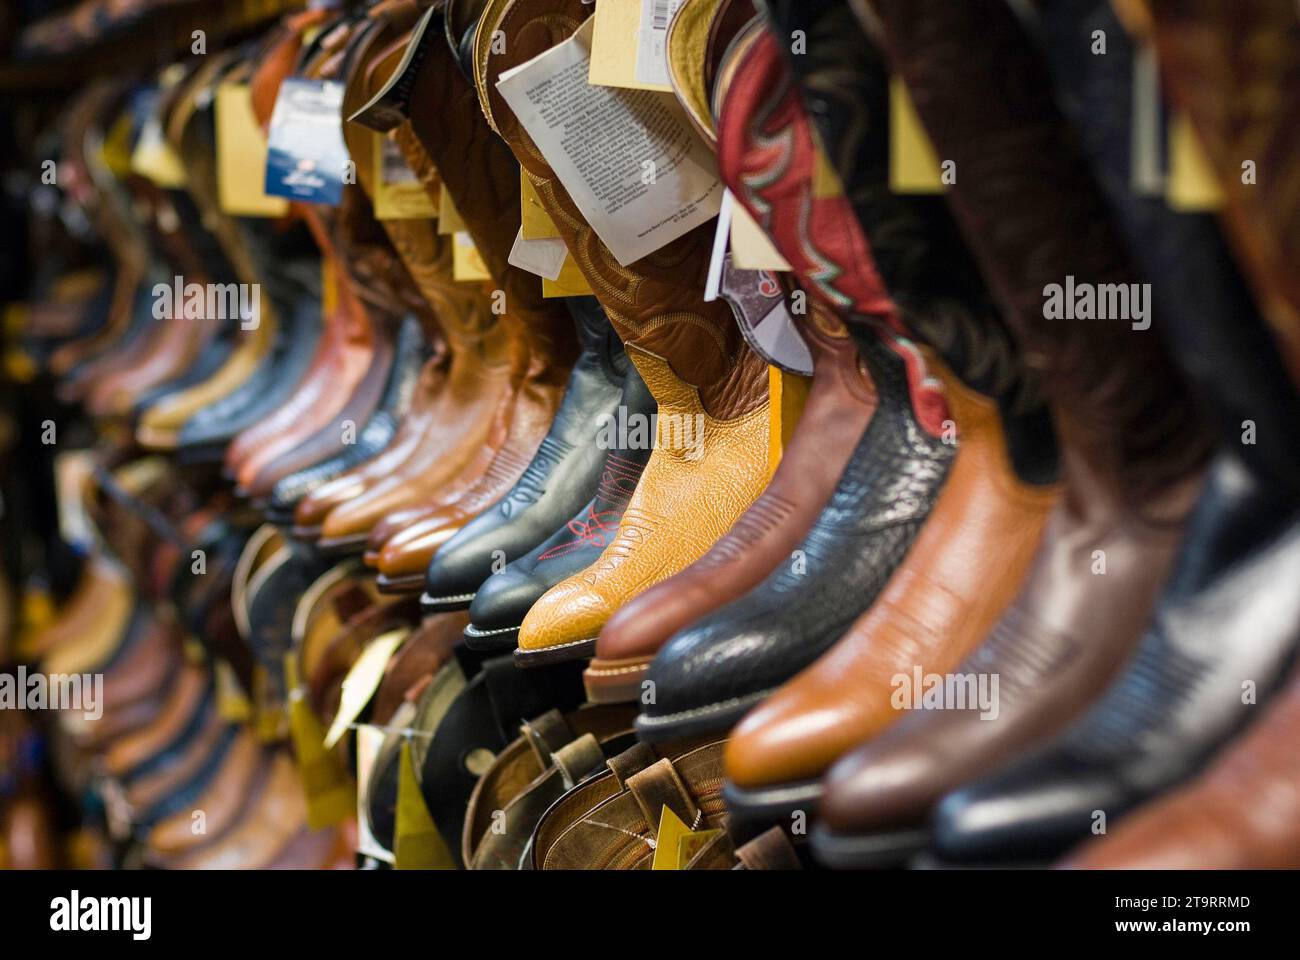 Cowboy boots, shoes, boots, fashion, timeless, western shop, Utah, USA Stock Photo